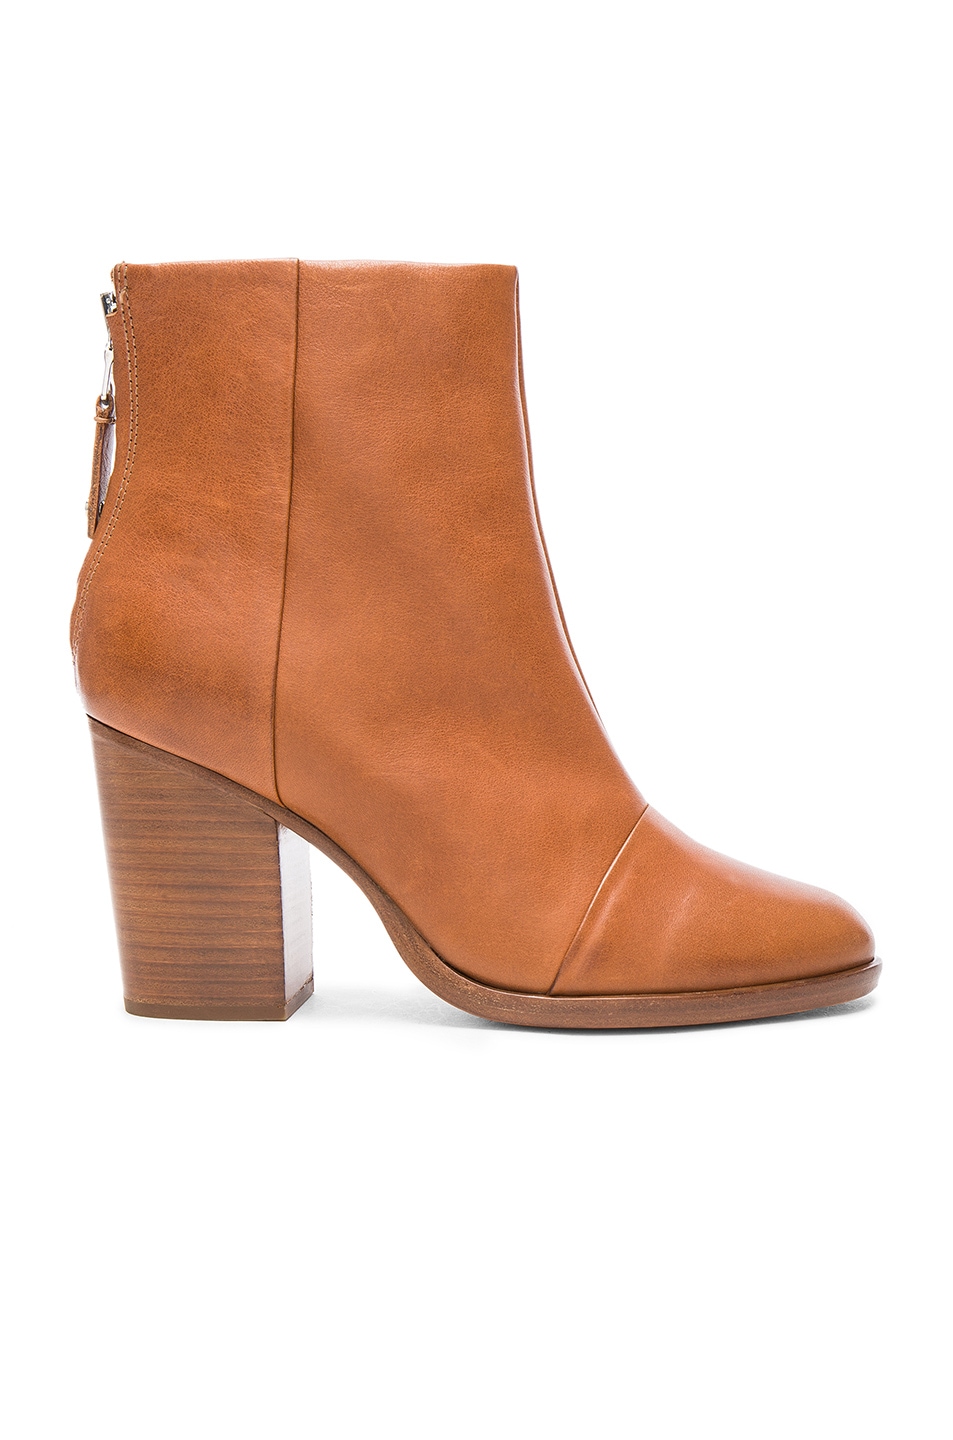 Image 1 of Rag & Bone Leather Ashby Ankle High Boots in Tan